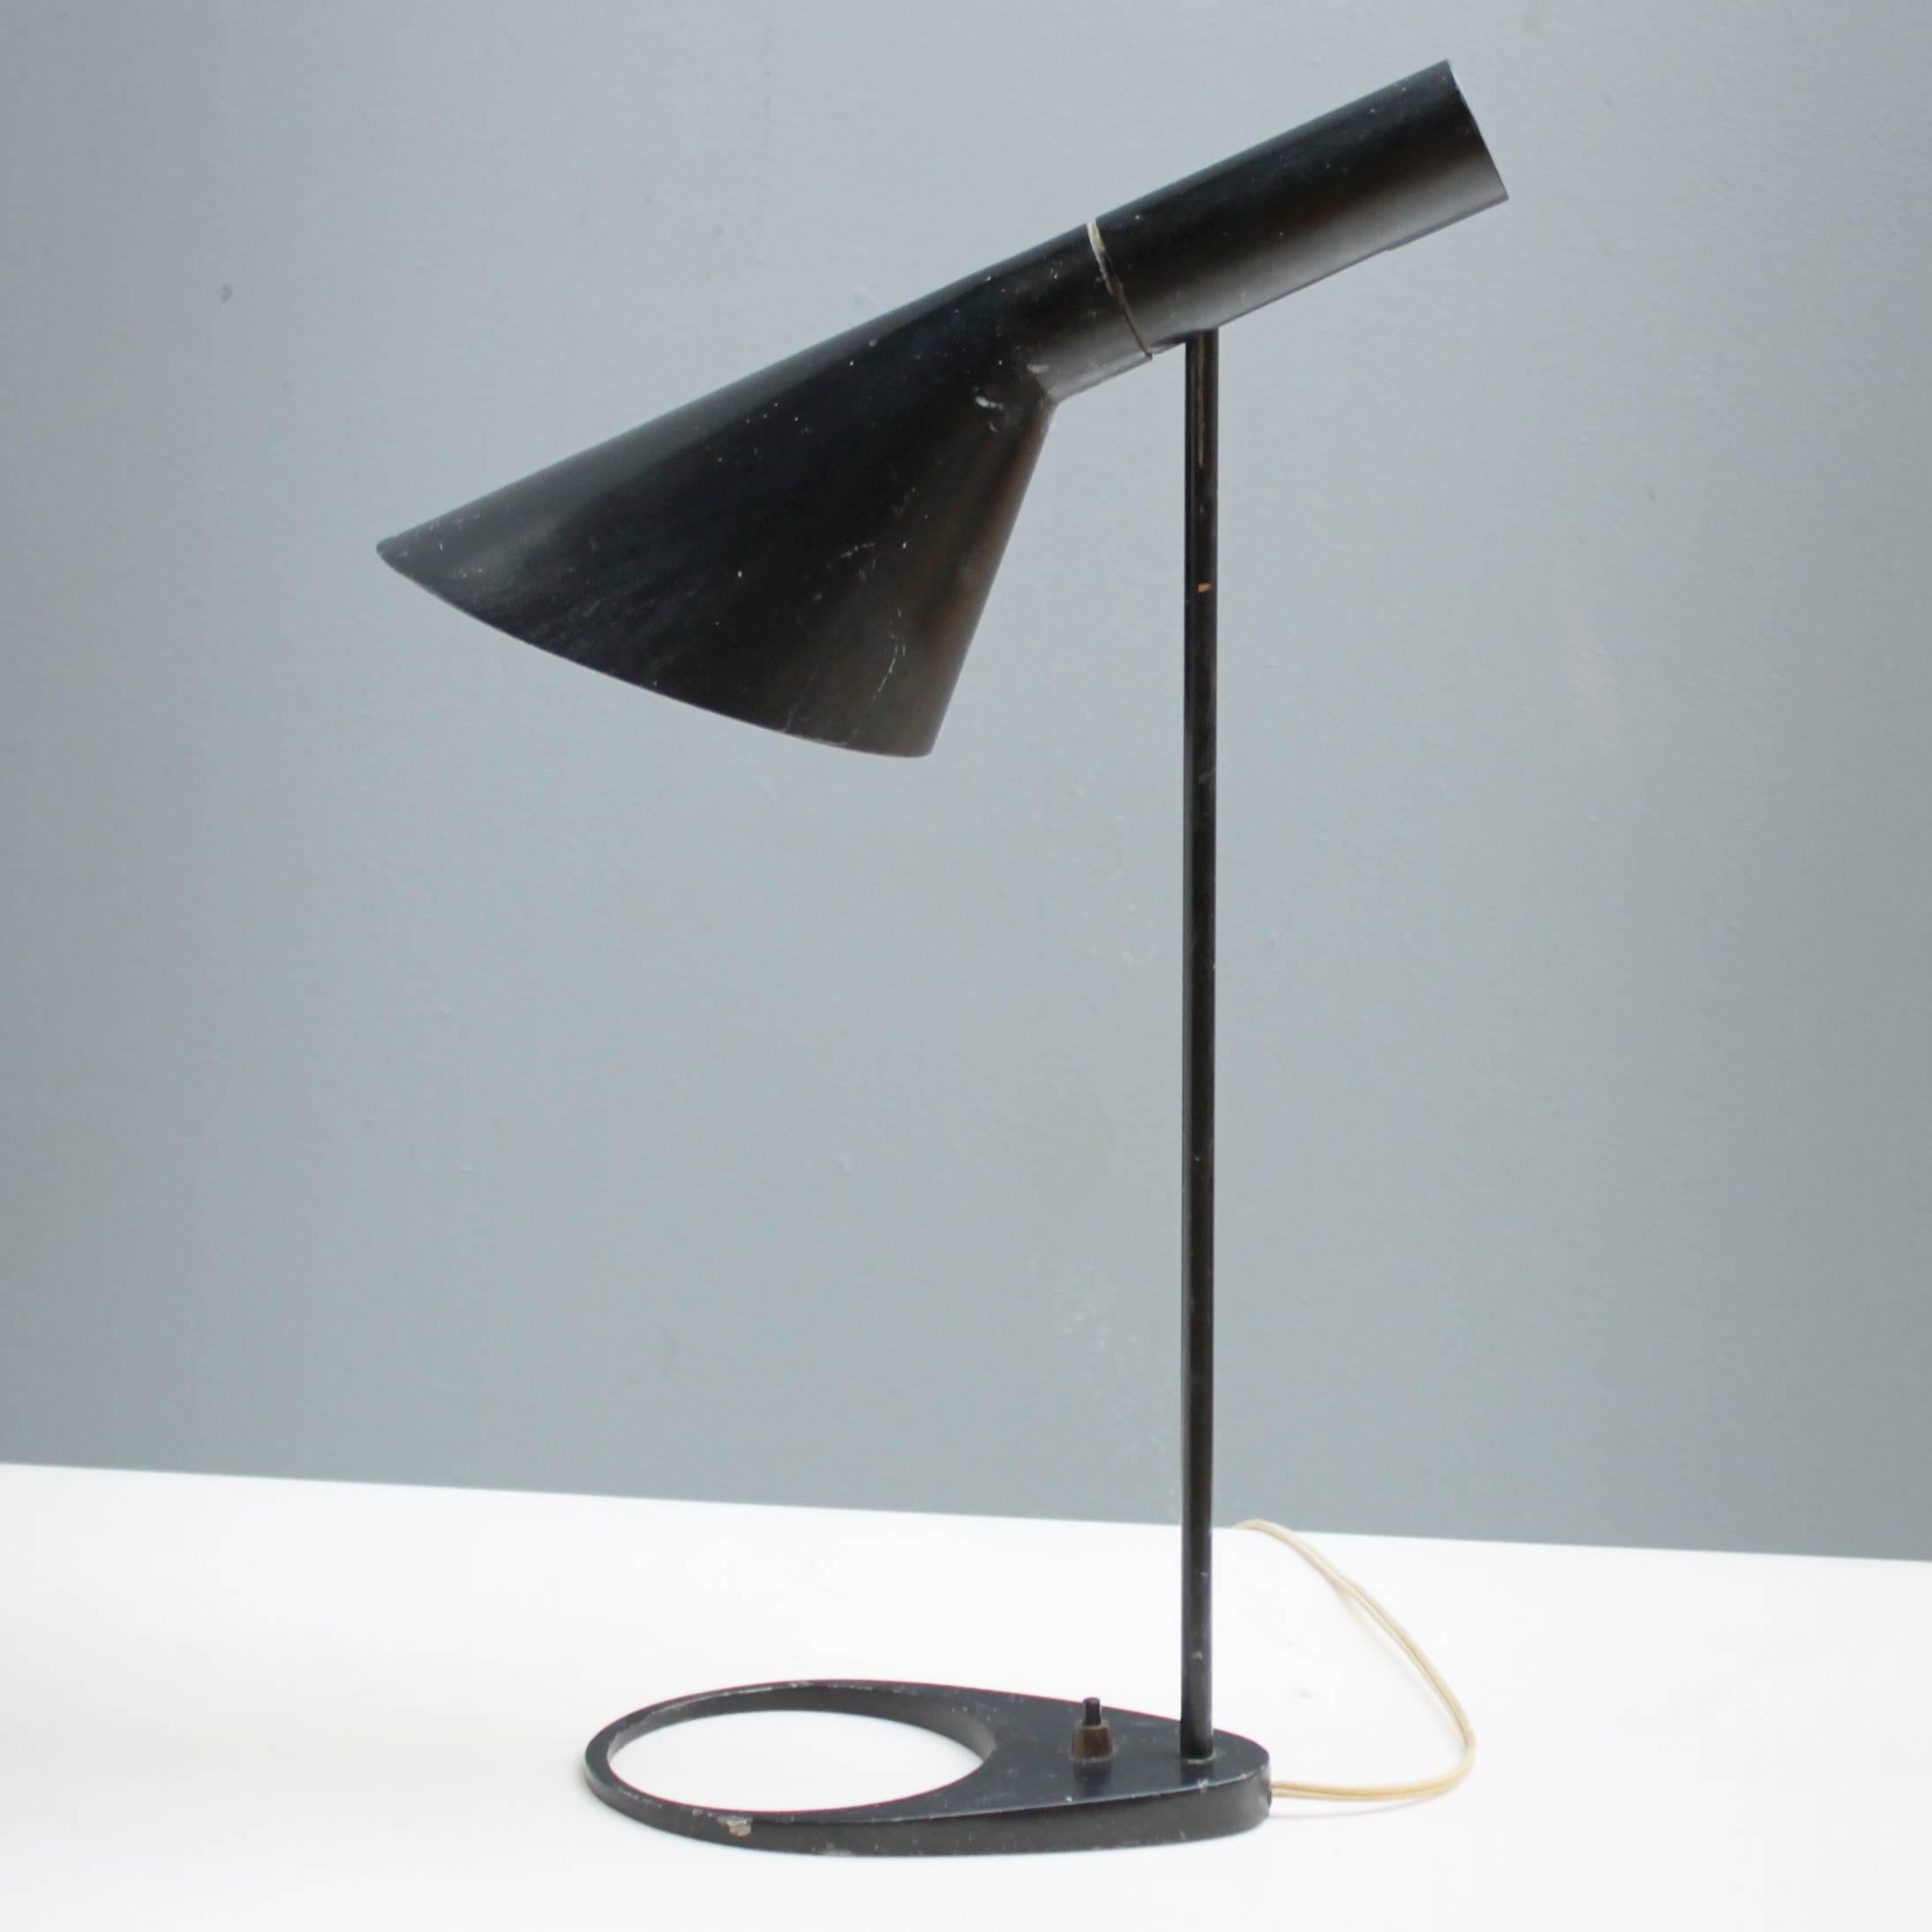 Original first edition Arne Jacobsen AJ table lamp for Louis Poulsen. The AJ lamps were designed in 1957 by Arne Jacobsen for the SAS Royal Hotel in Copenhagen.
Dimensions: max height 21.6 in. (55 cm), length shade 13.4 in. (34 cm), diameter shade